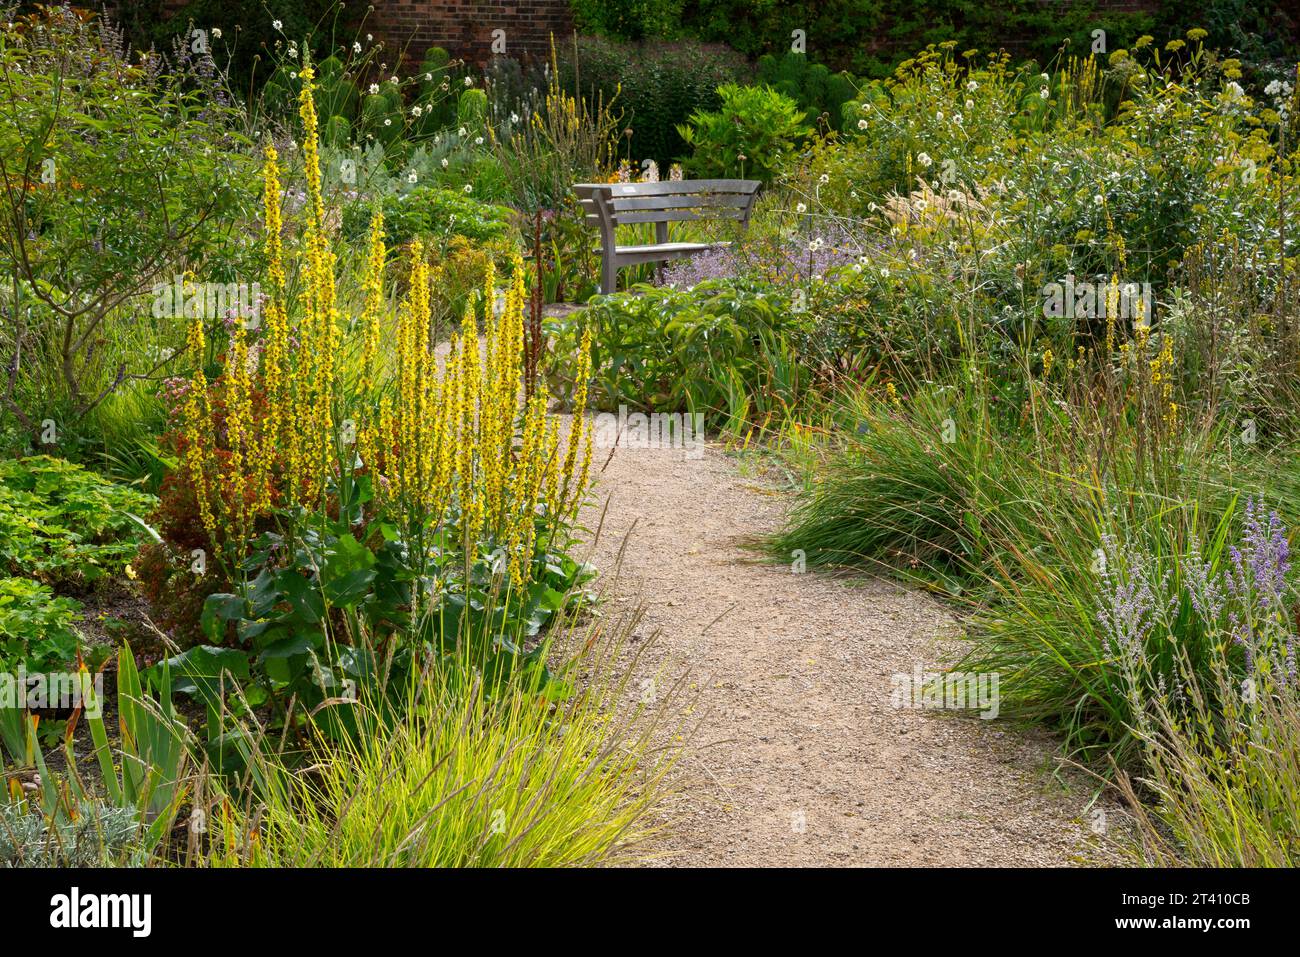 Summer planting in the Paradise Garden at RHS Bridgewater, Worsley, Manchester, England. Stock Photo